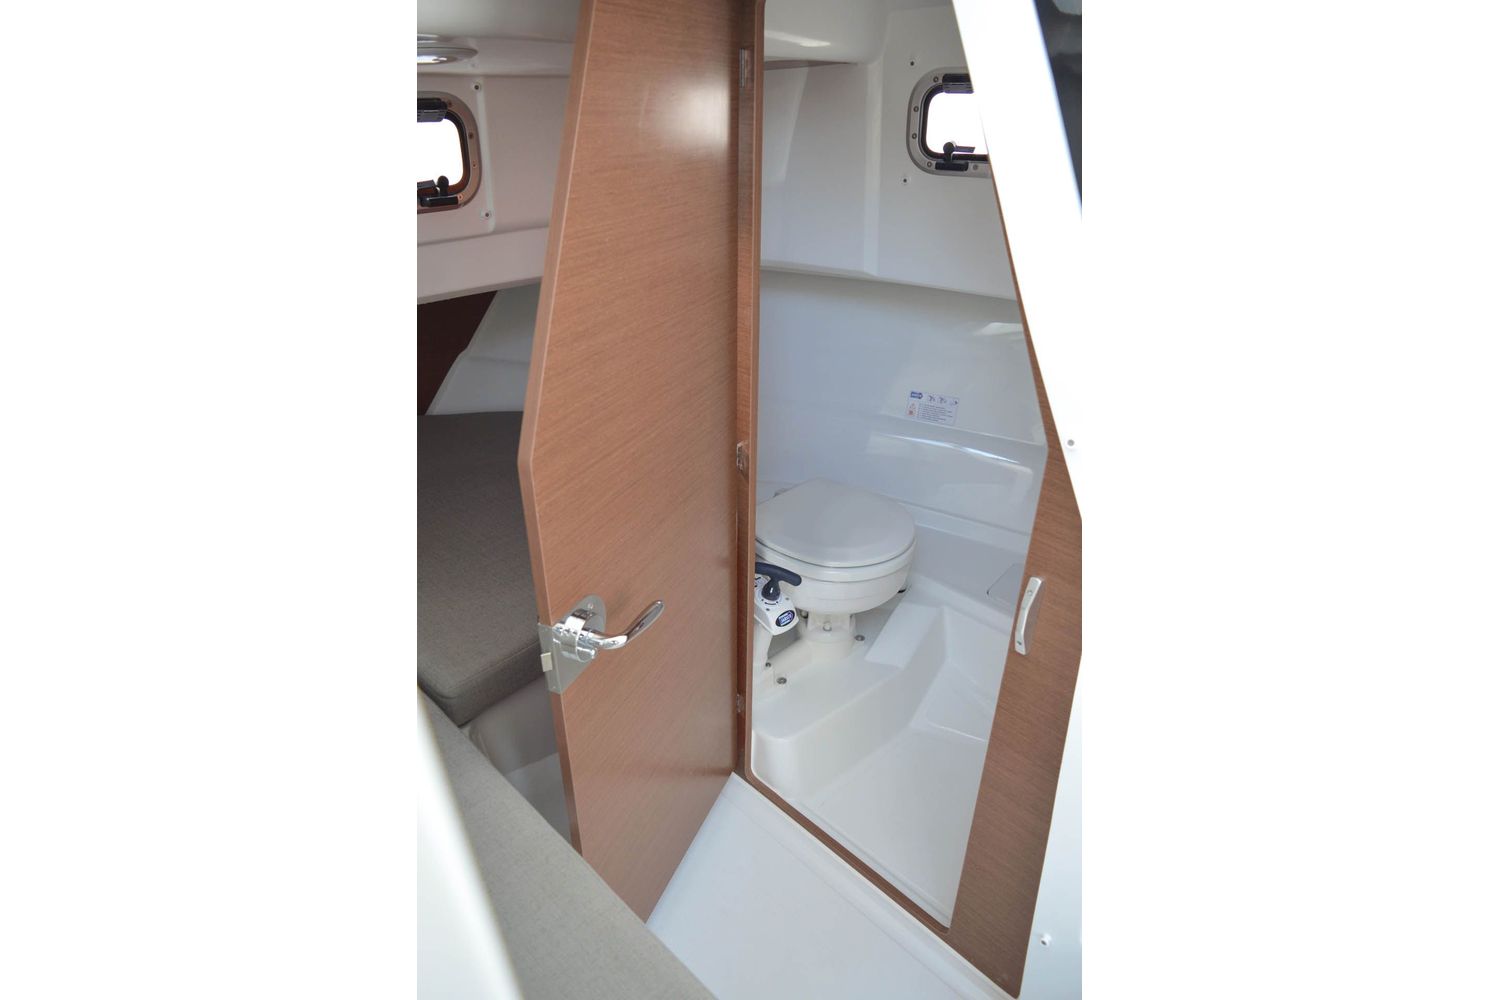 Jeanneau Merry Fisher 795 Marlin - toilet compartment